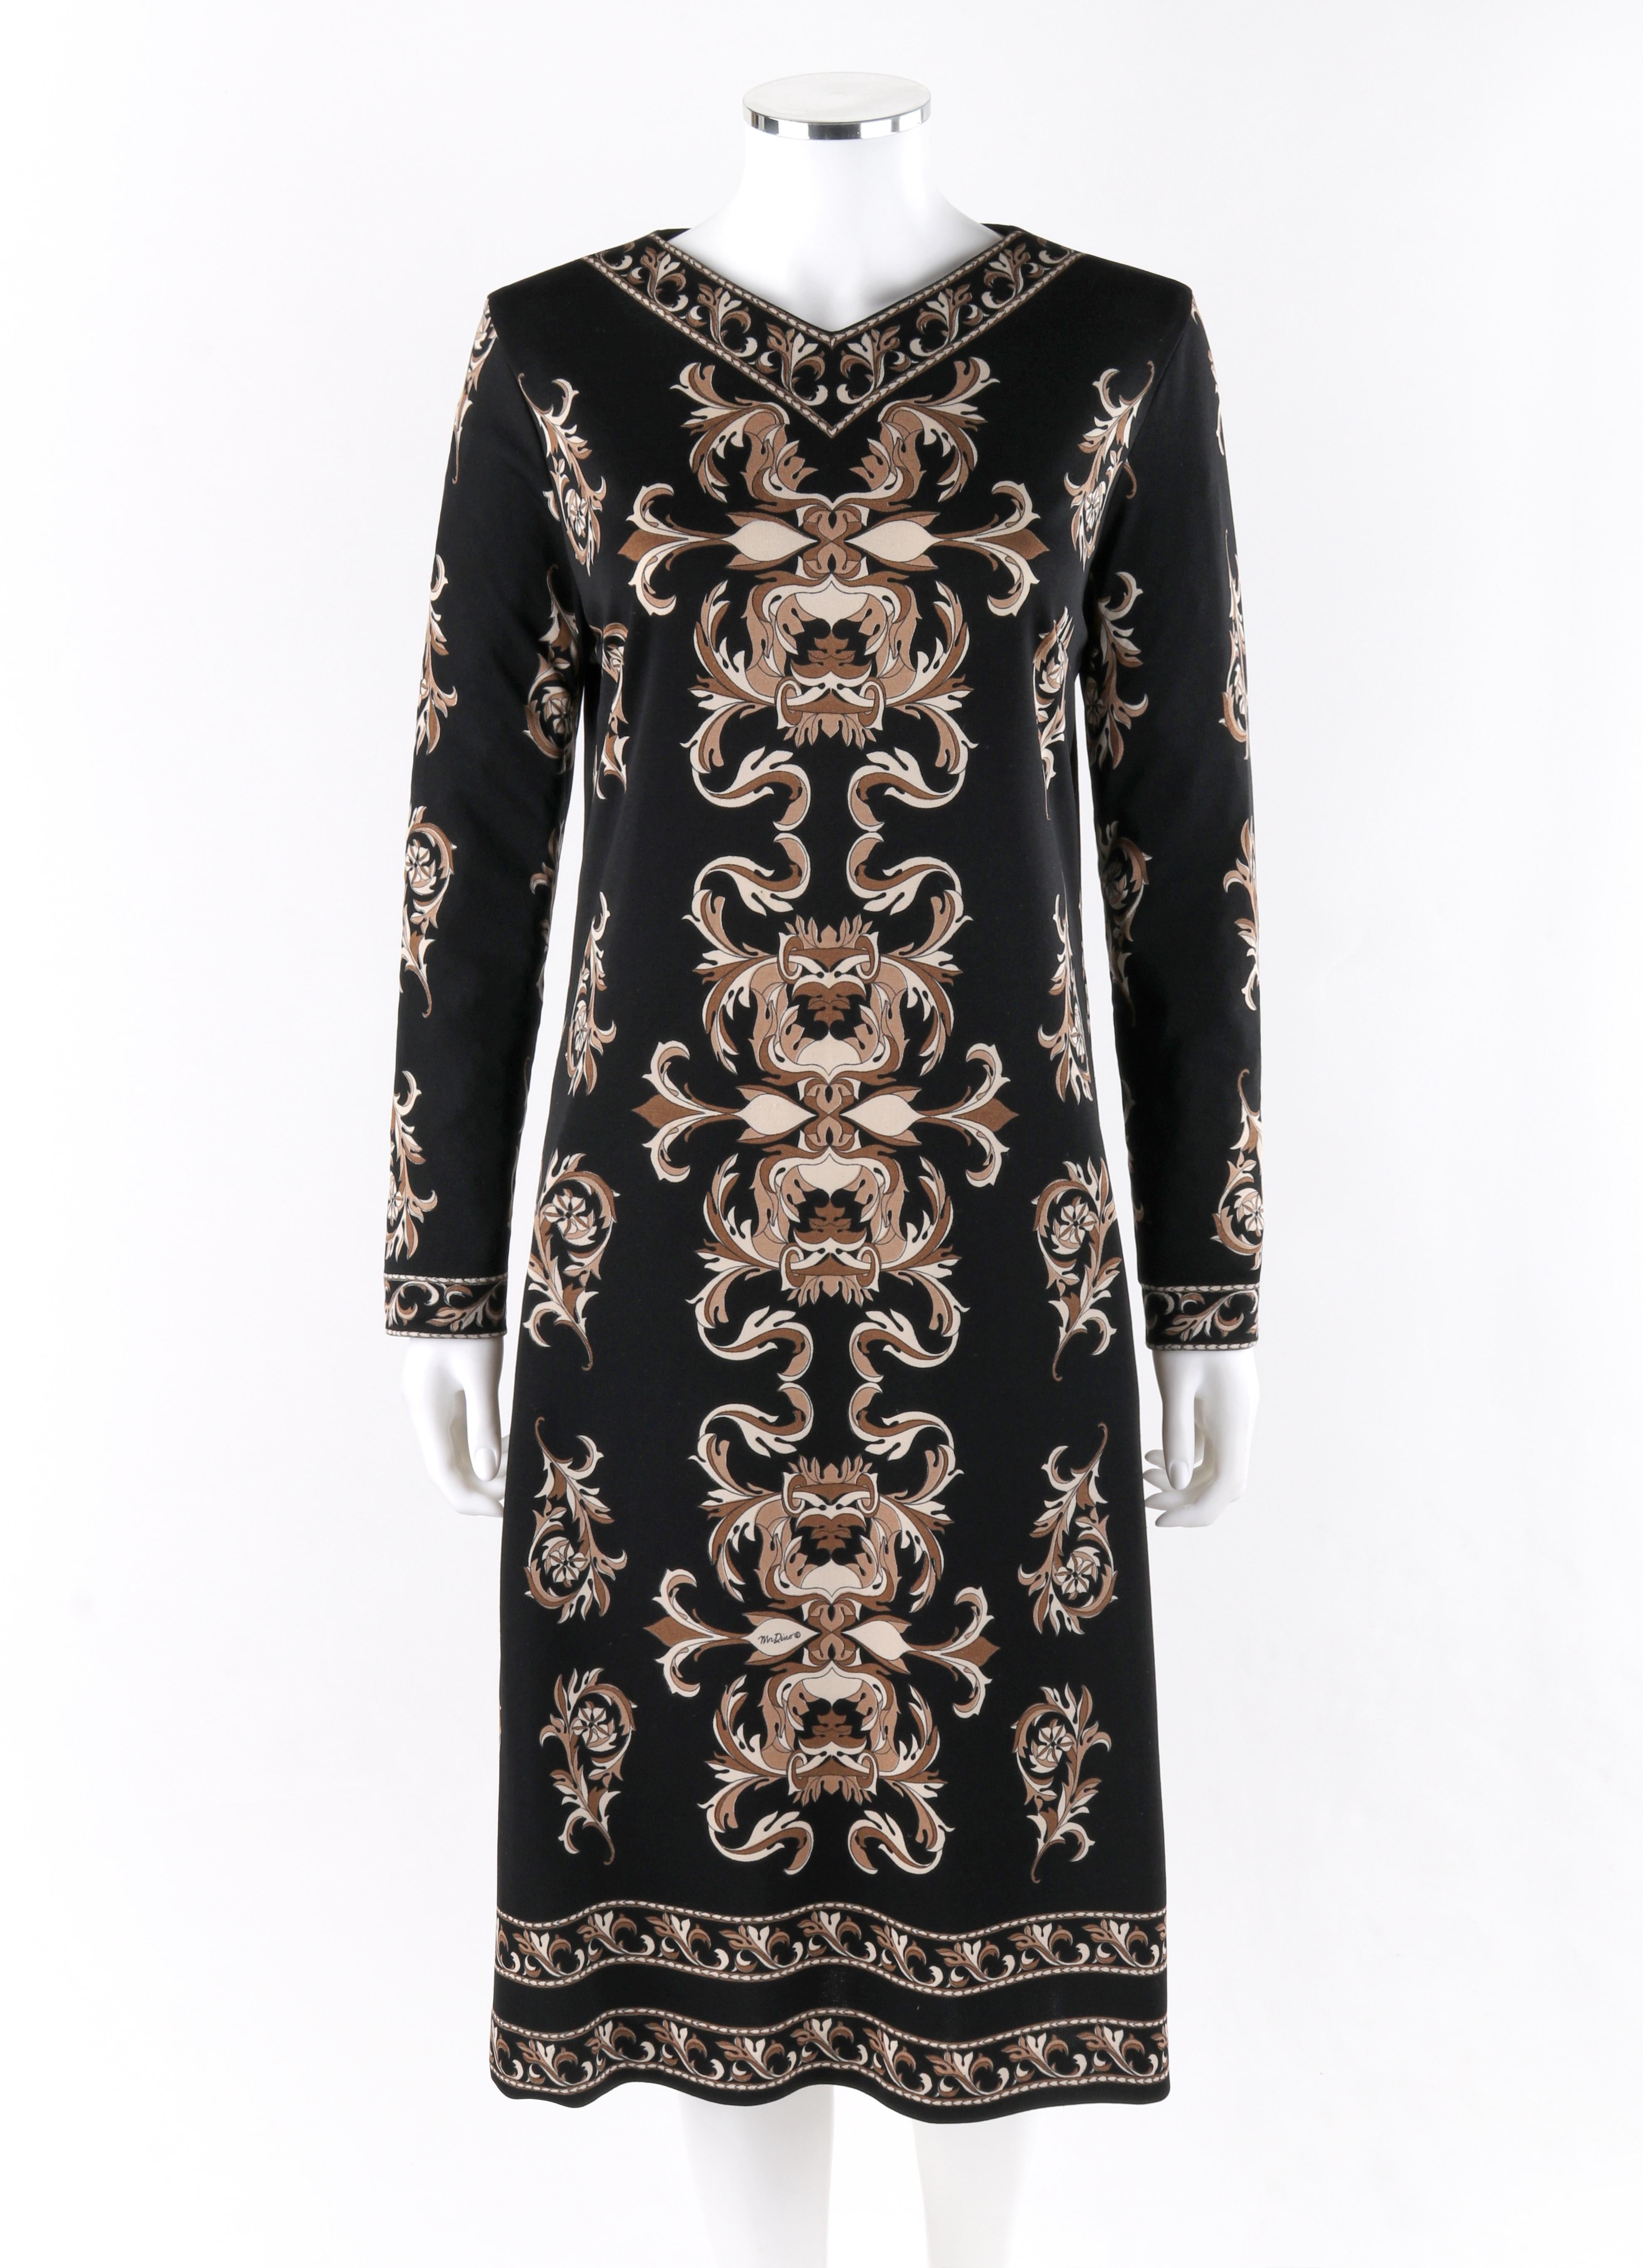 MR DINO c.1970’s Black Brown Cream Signature Print Long Sleeve Belted Shift Dress

Circa: 1970’s
Label(s): Mr. Dino, I.Maginin & Co.  
Designer: Max Cohen
Style: Shift dress
Color(s): Shades of black, tan, brown and cream
Lined: No
Unmarked Fabric